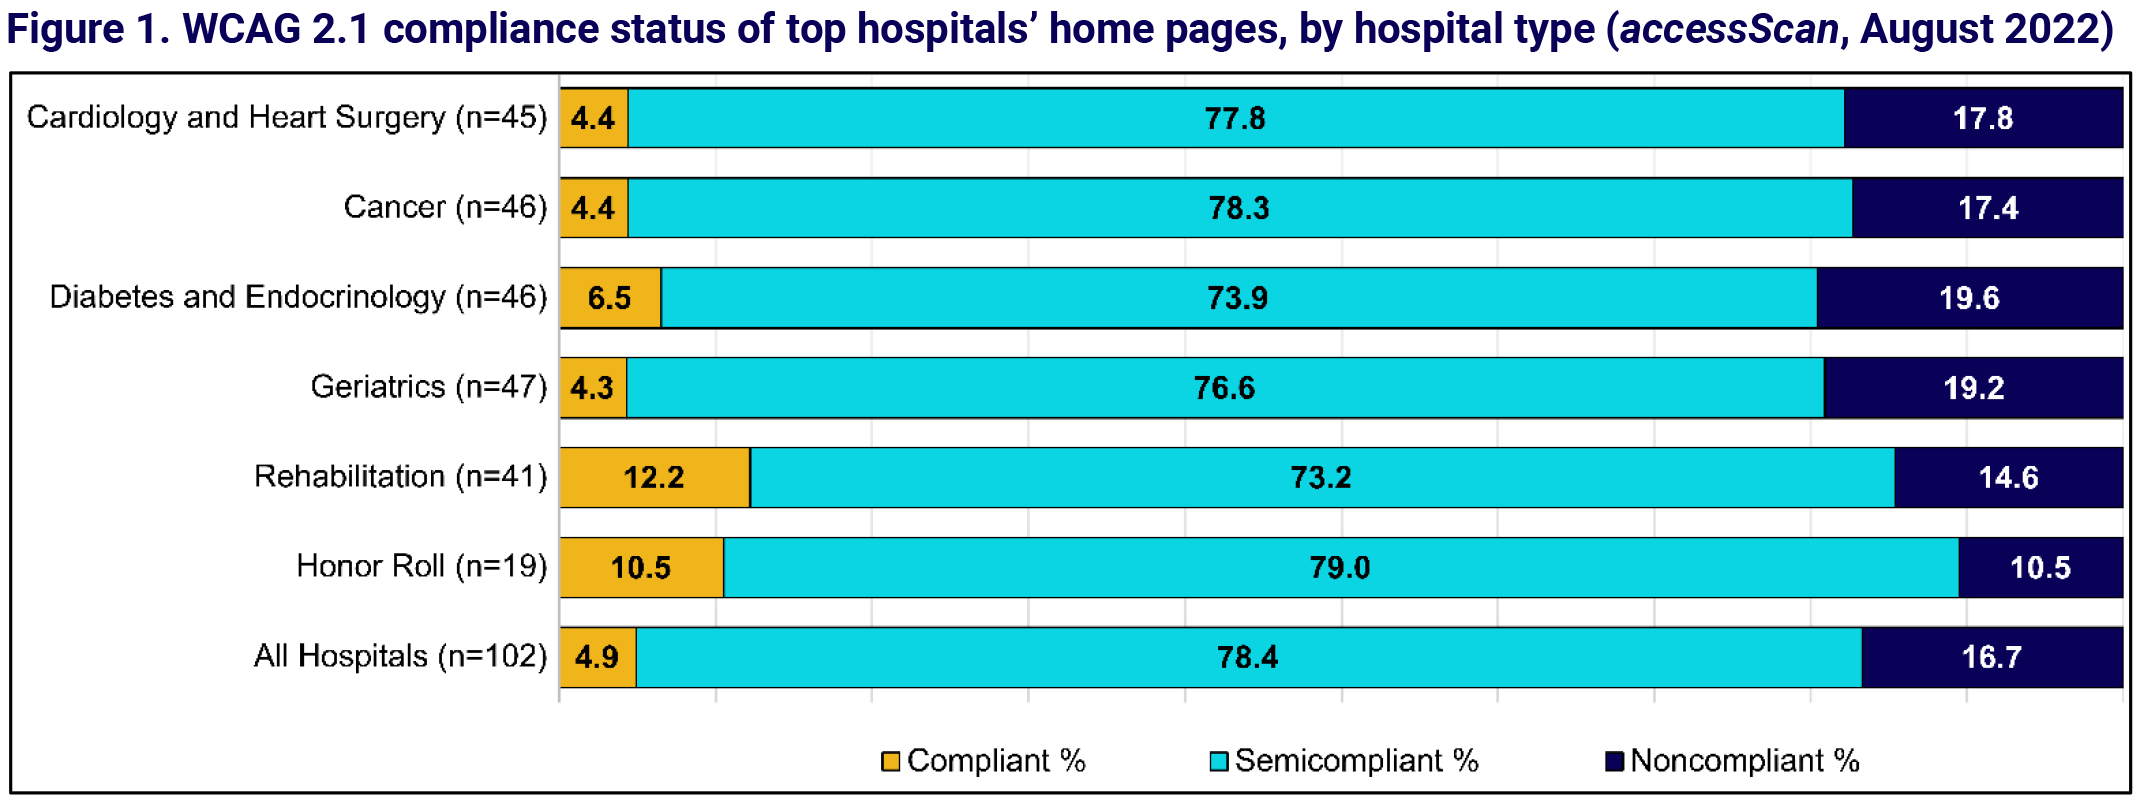 Figure 1. WCAG 2.1 compliance status of top hospitals' home pages, by hospital type (accessScan, August 2022)